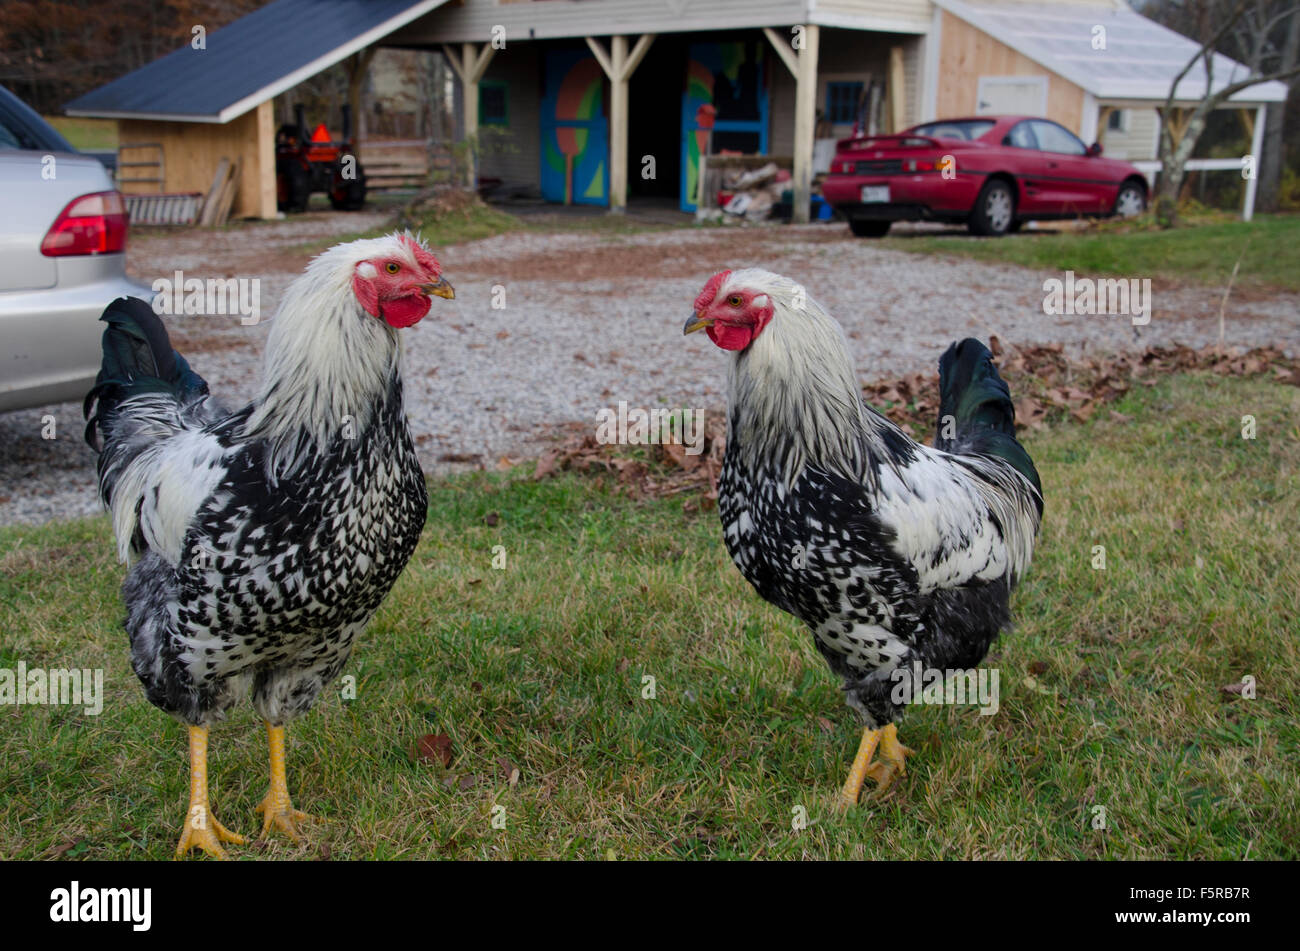 Face off, two Silver Laced Wyandotte roosters face each other in yard, Maine, USA Stock Photo